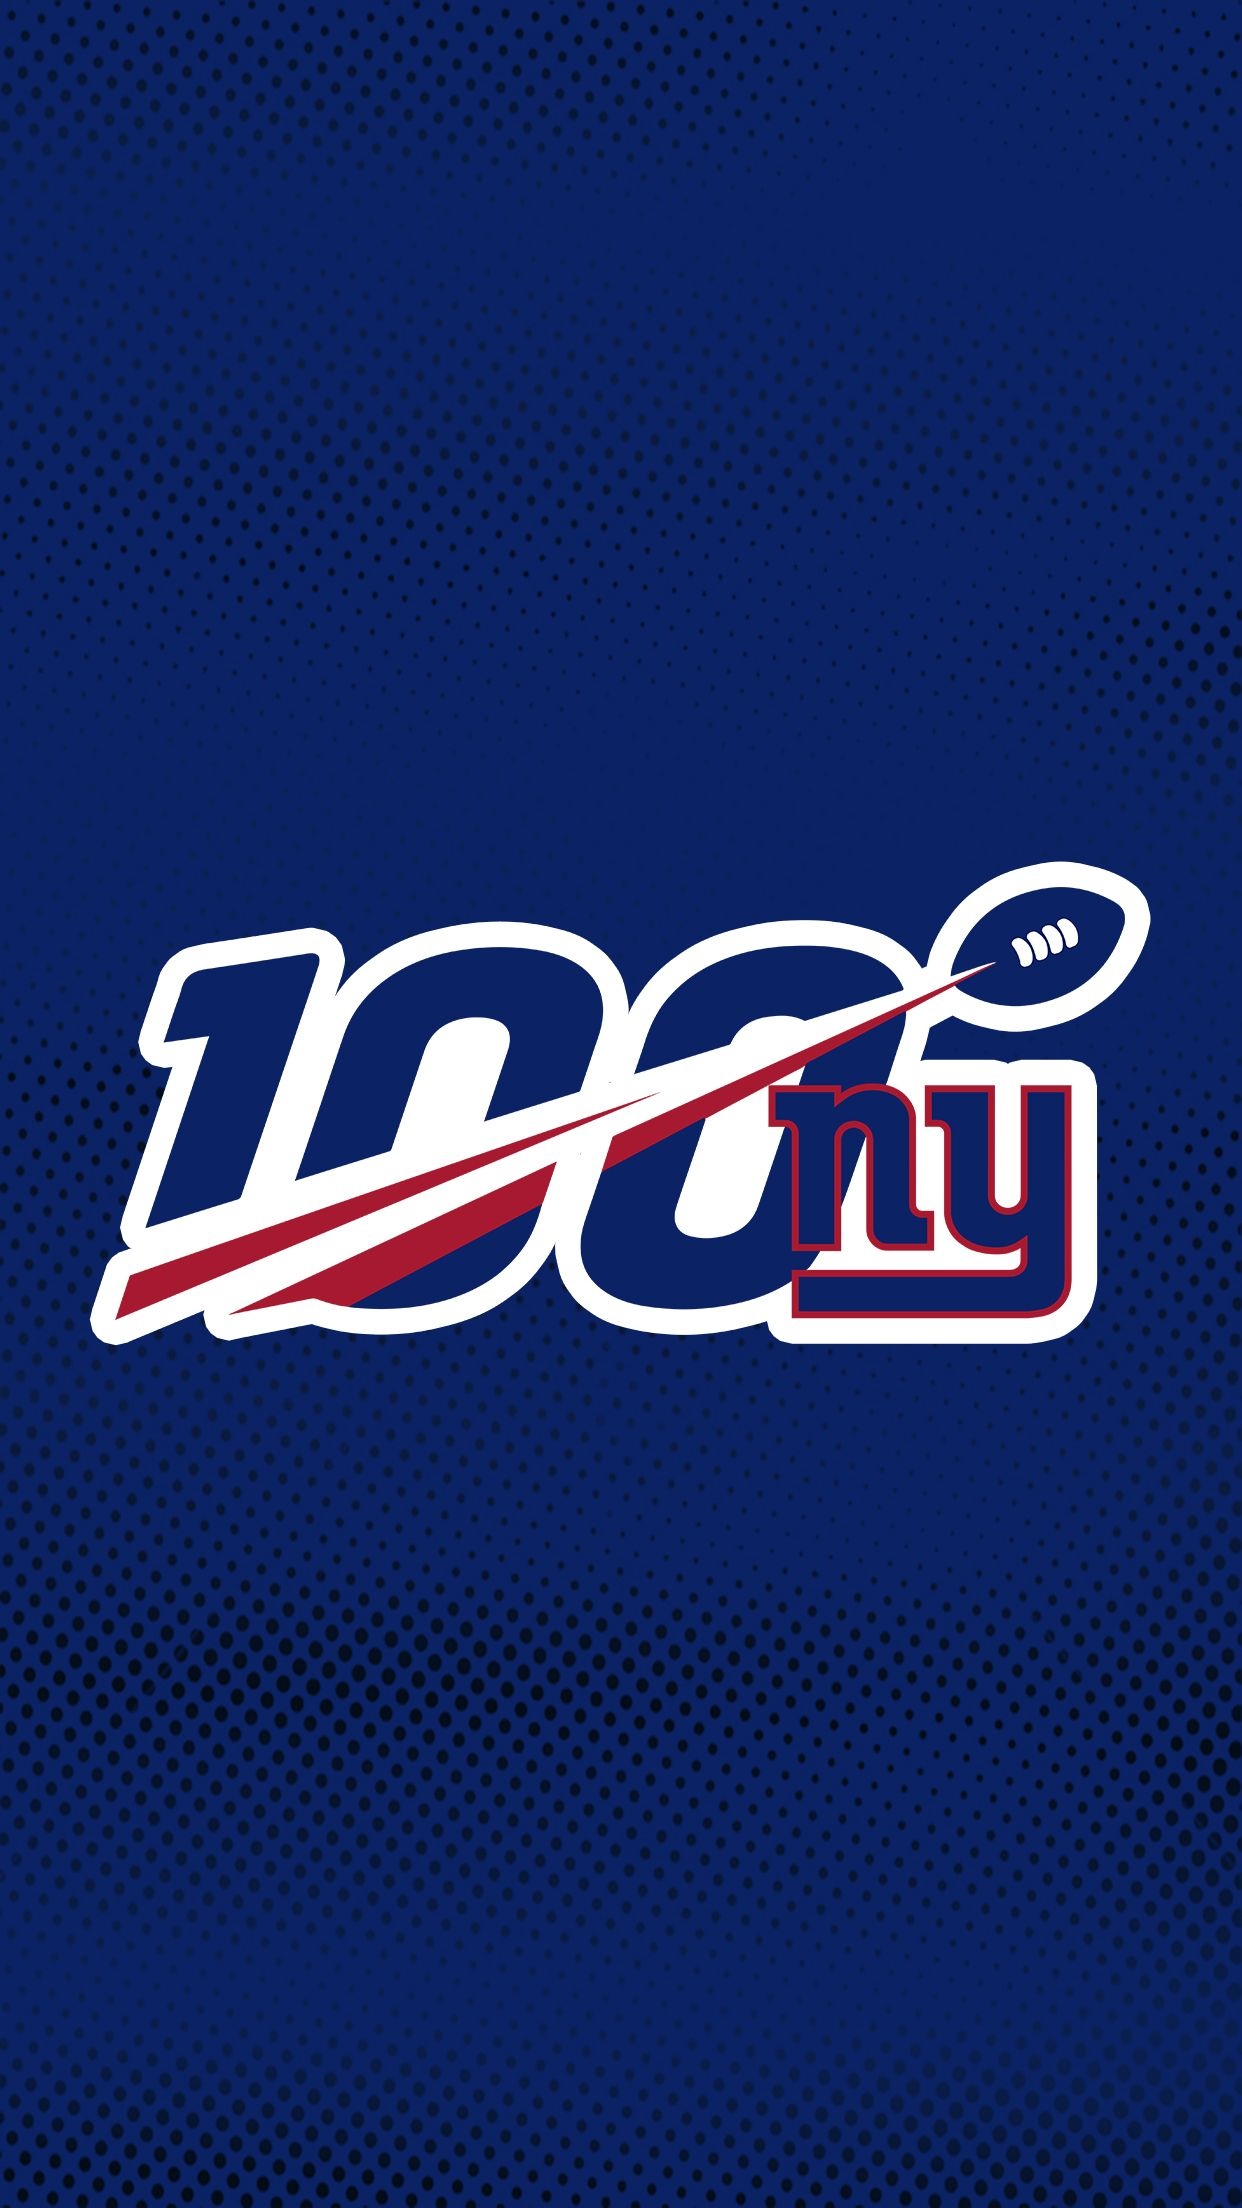 New York Giants: American professional gridiron football team based in East Rutherford, New Jersey, NFL. 1250x2210 HD Wallpaper.